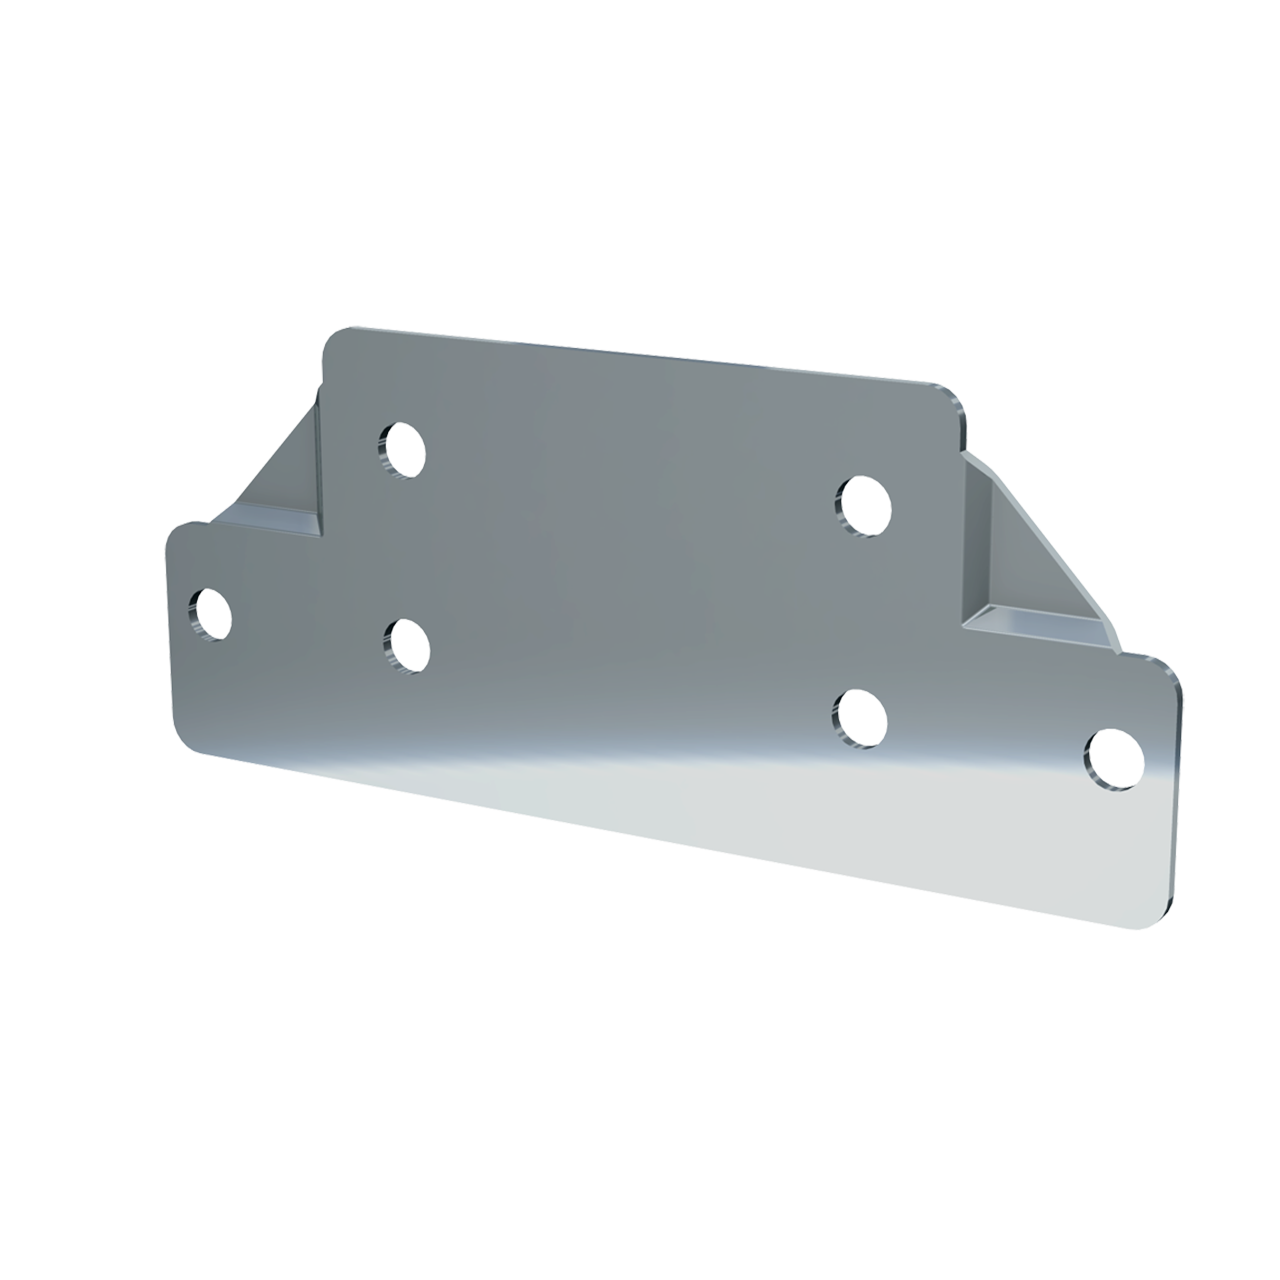 7/8" Offset Flat Clamp, 3/4 view